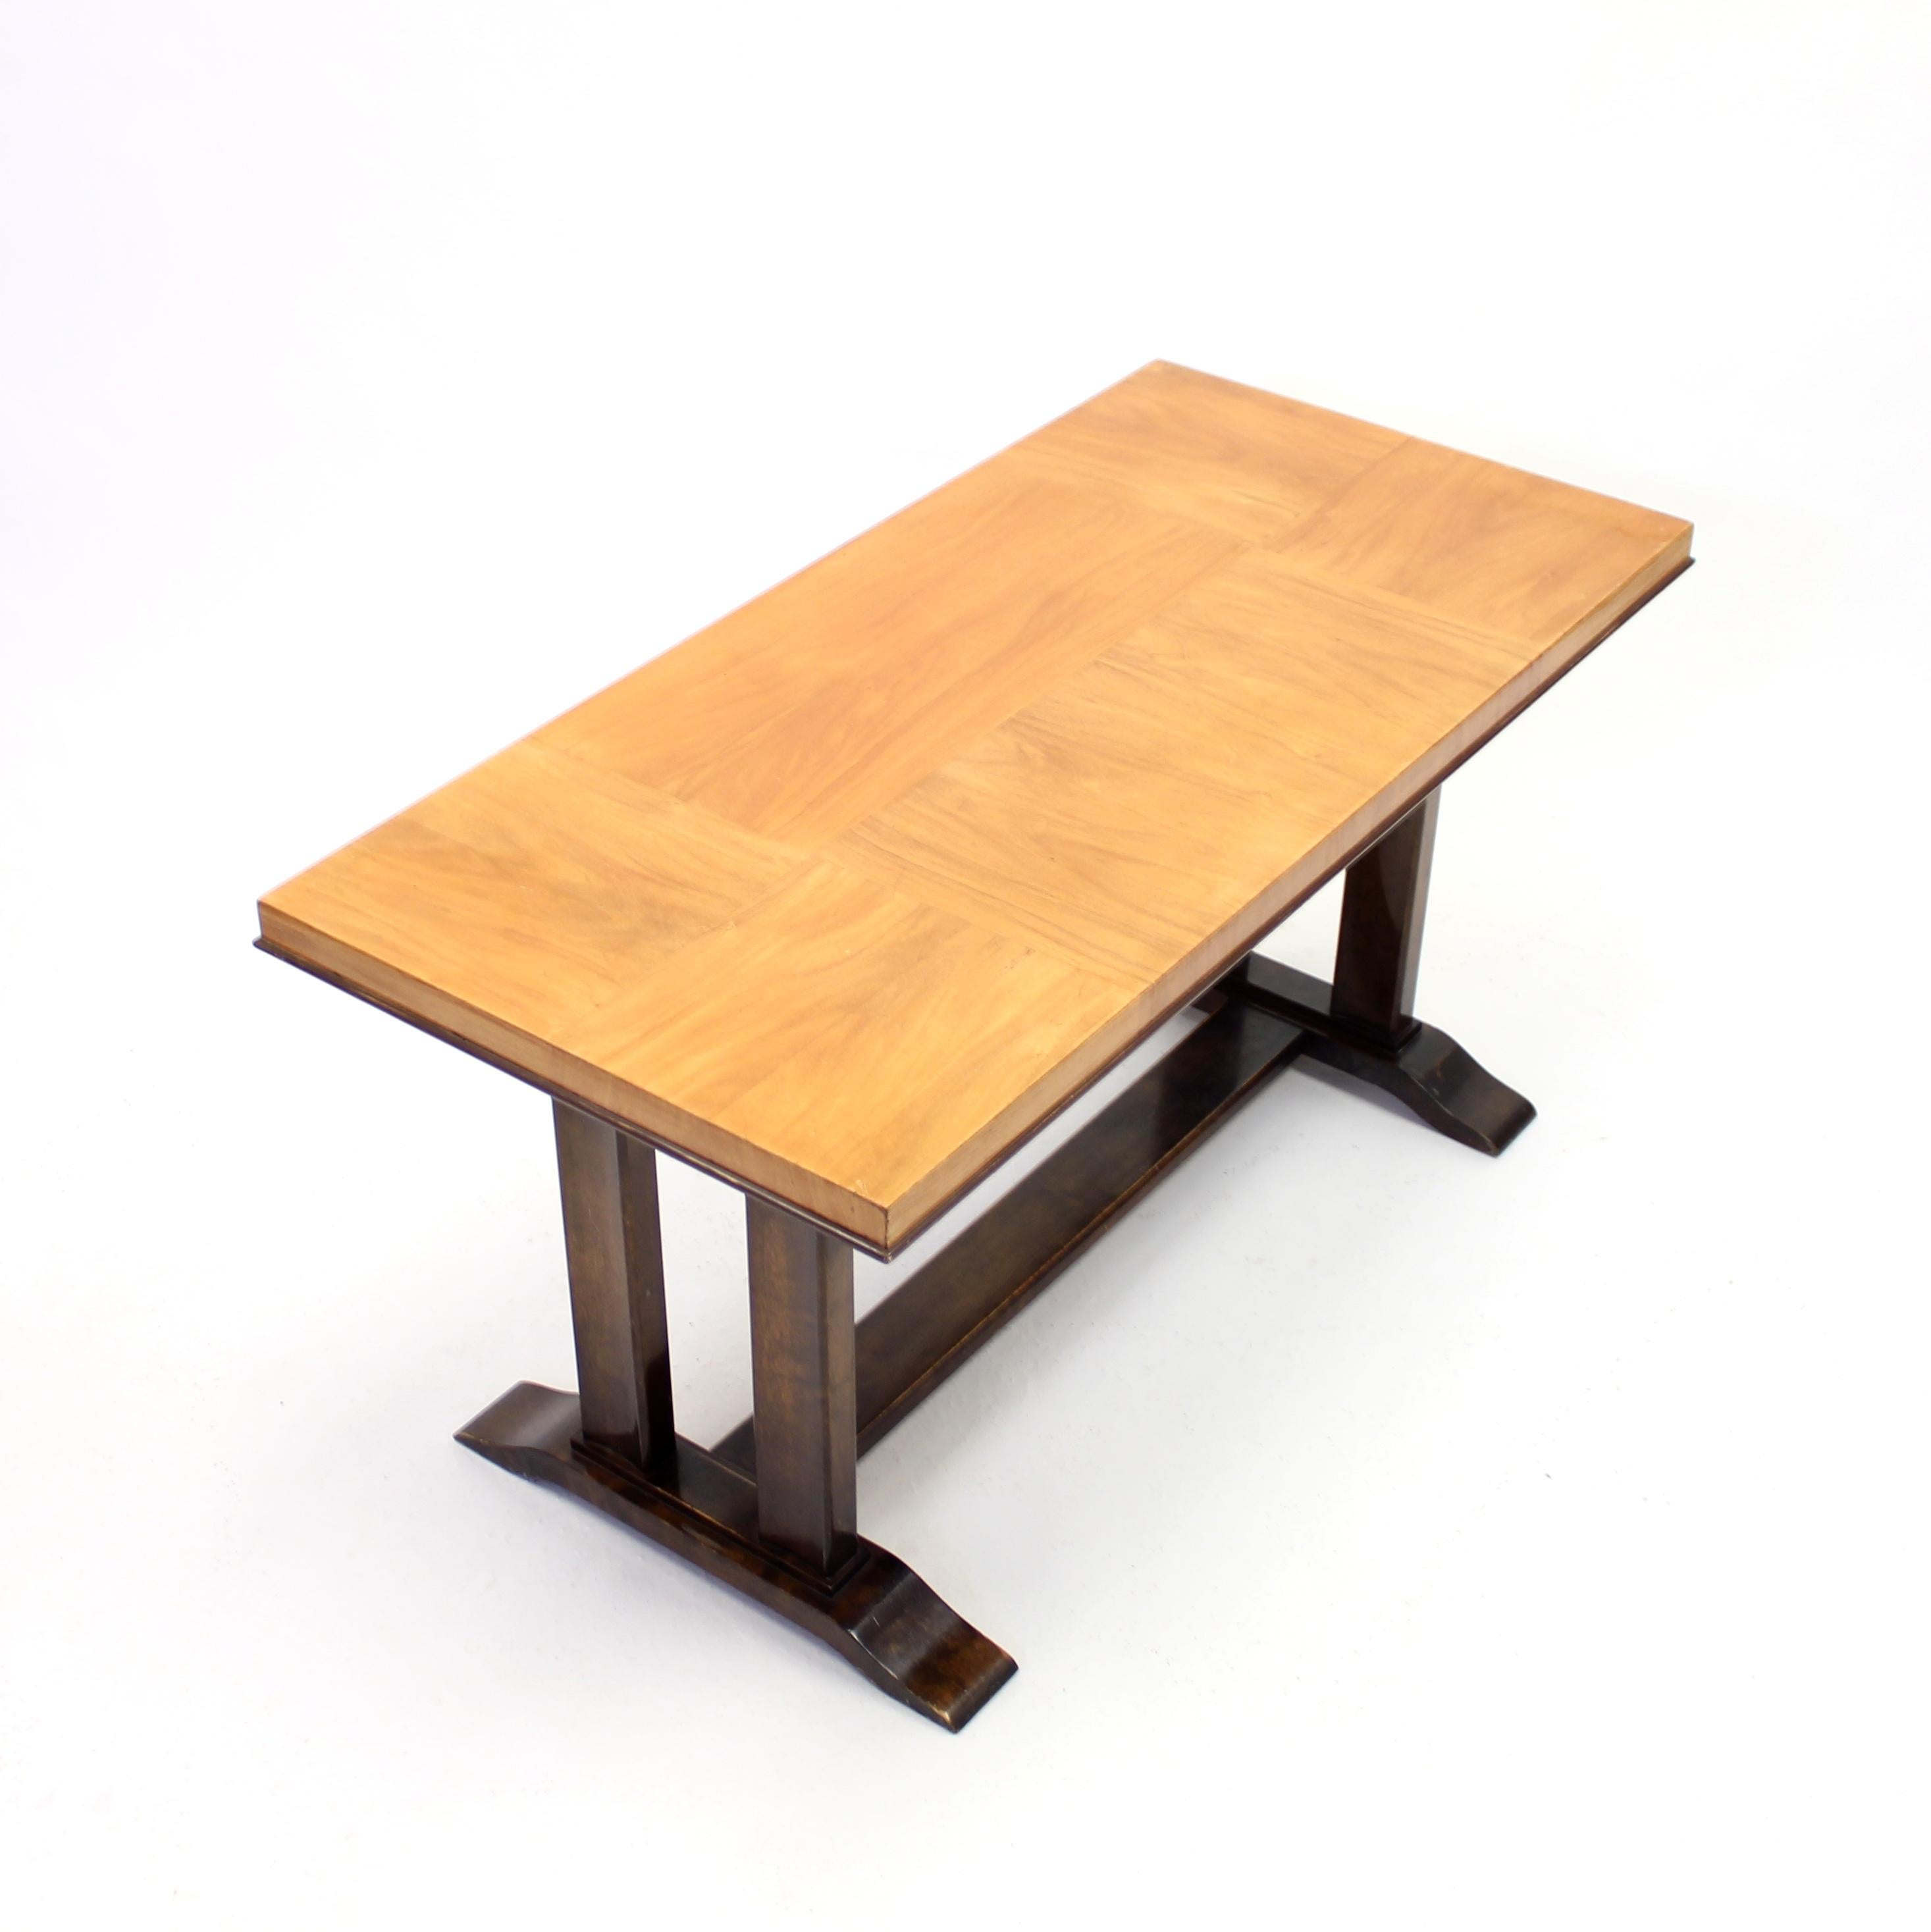 Rare Art Deco / Swedish Modern coffee or side table attributed to Axel Einar Hjorth, manufactured by Nordiska Kompaniet (NK). Produced in 1937. Stained Birch base with a very unusual wood type named Evaco as the main material for table top and